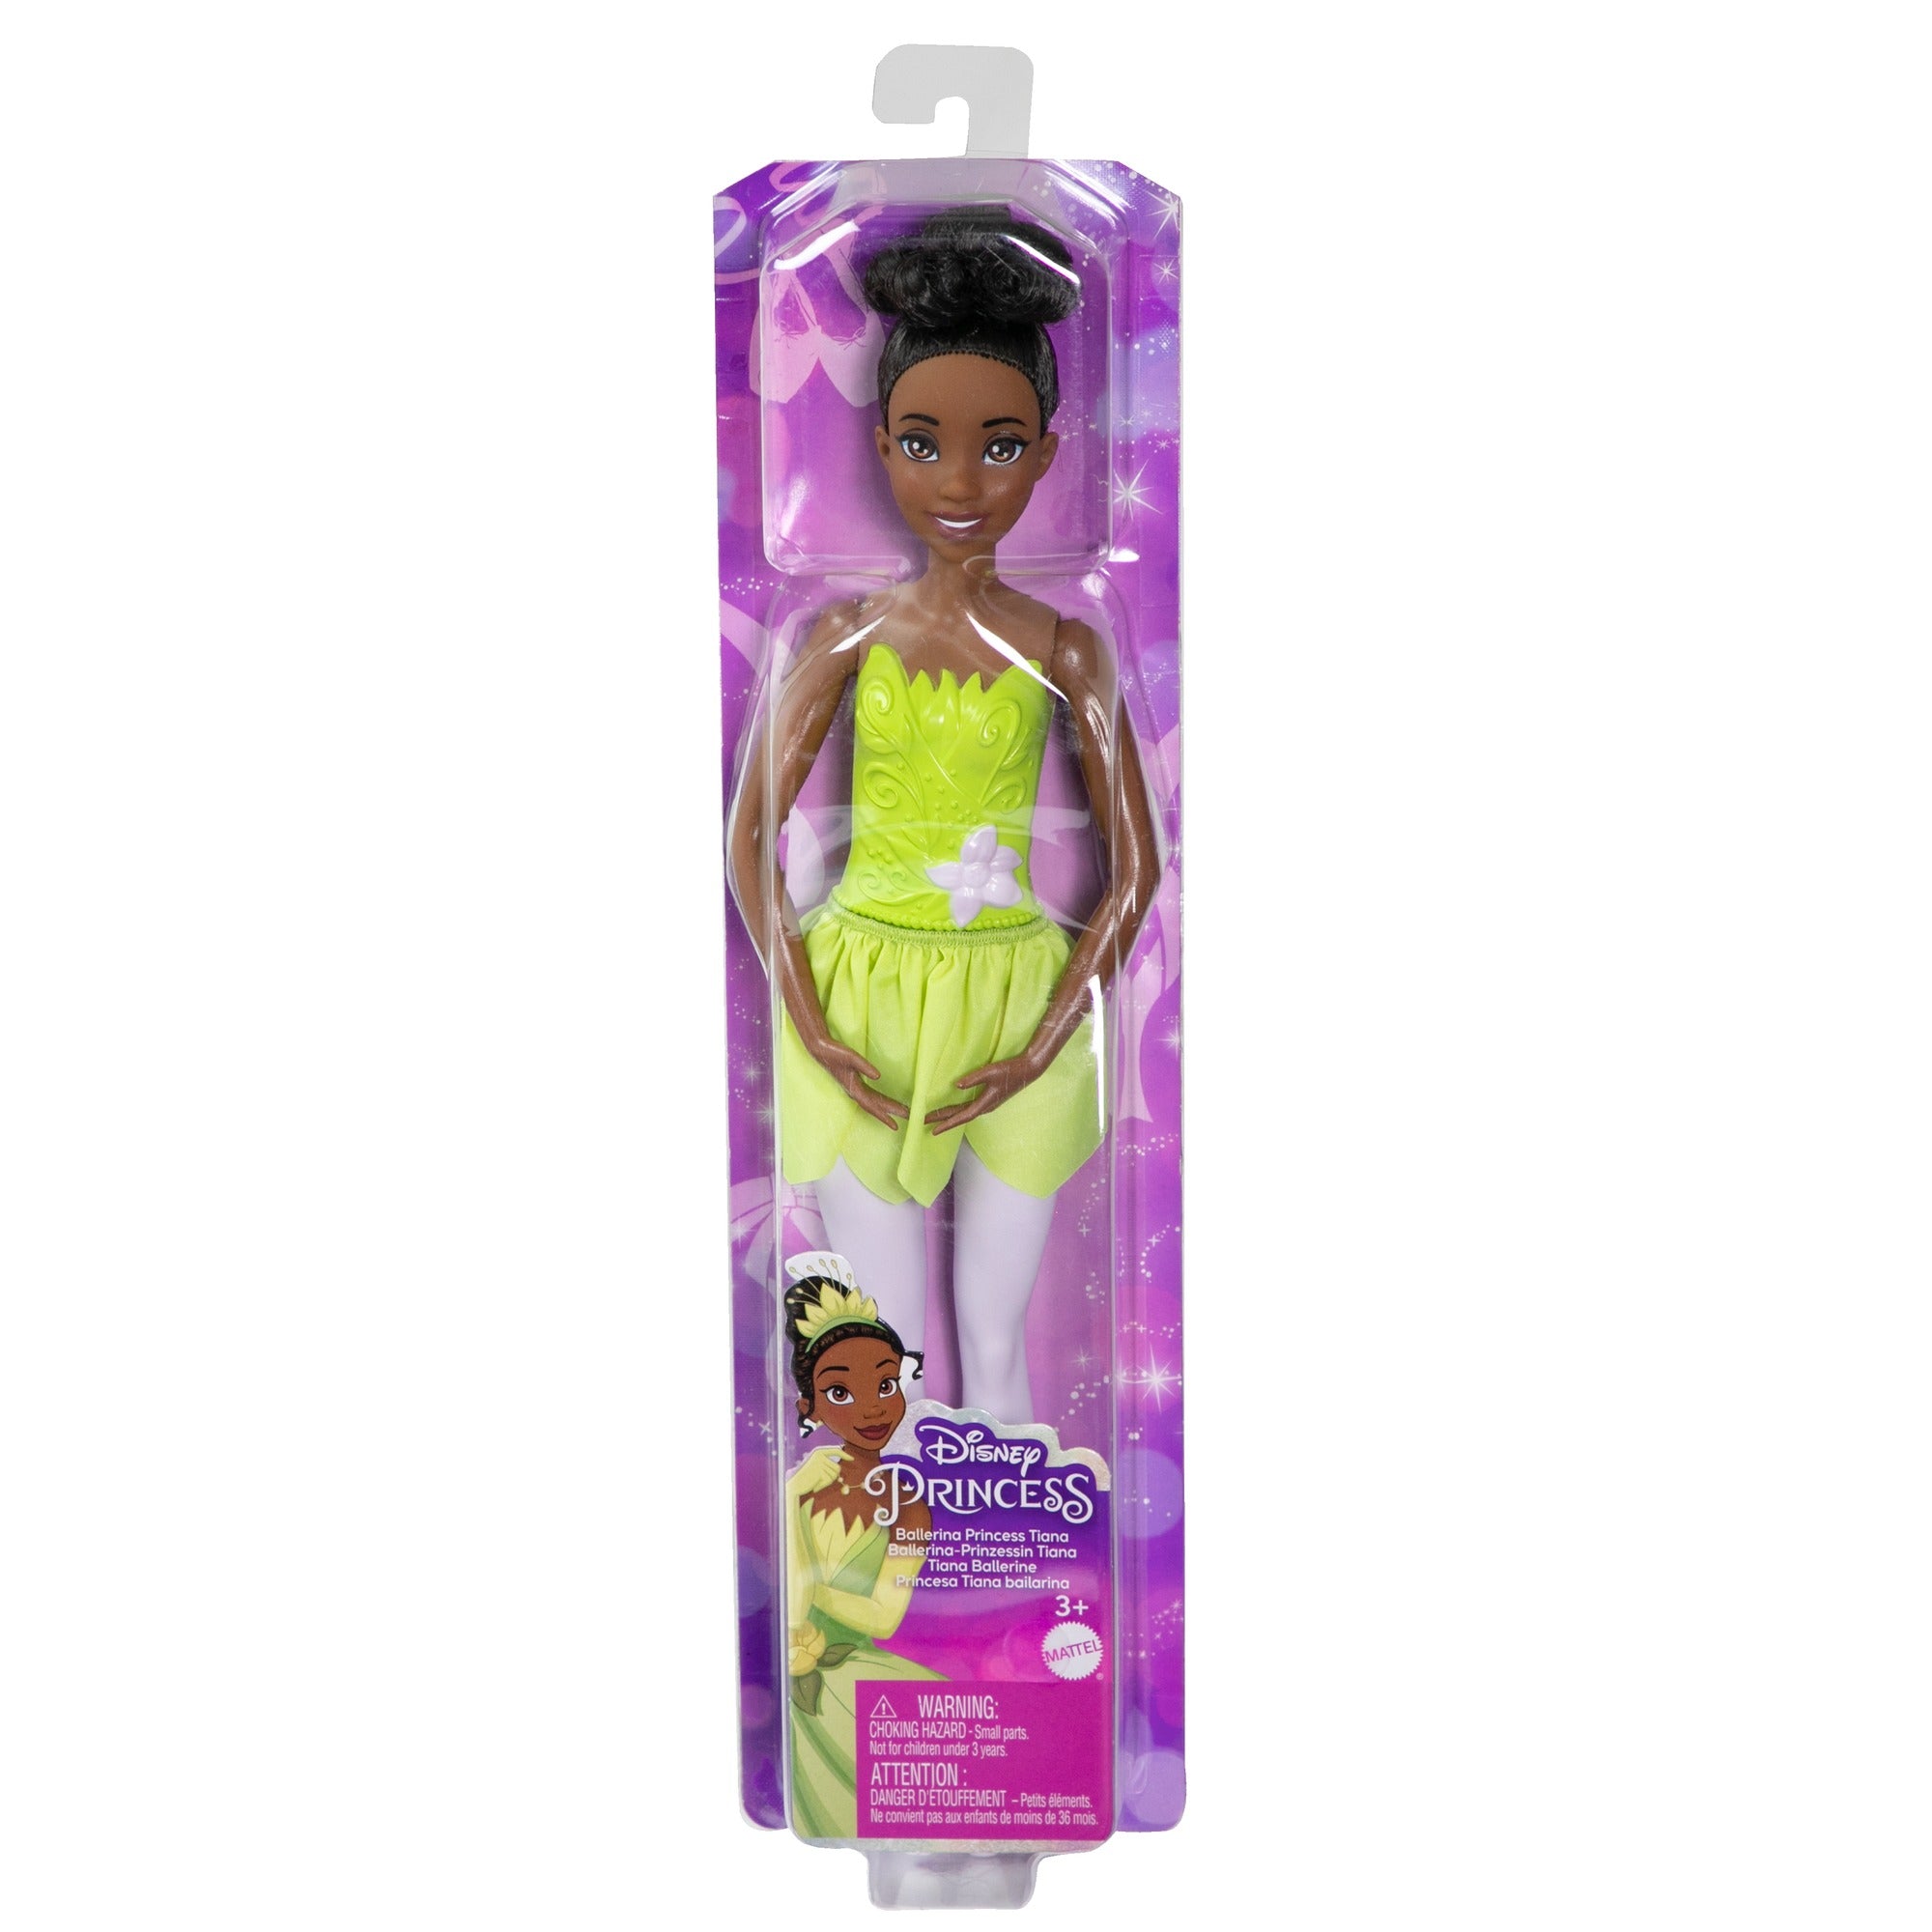 Disney Princess Posable Ballerina Tiana Doll Inspired by the Disney Movie for Kids Ages 3+